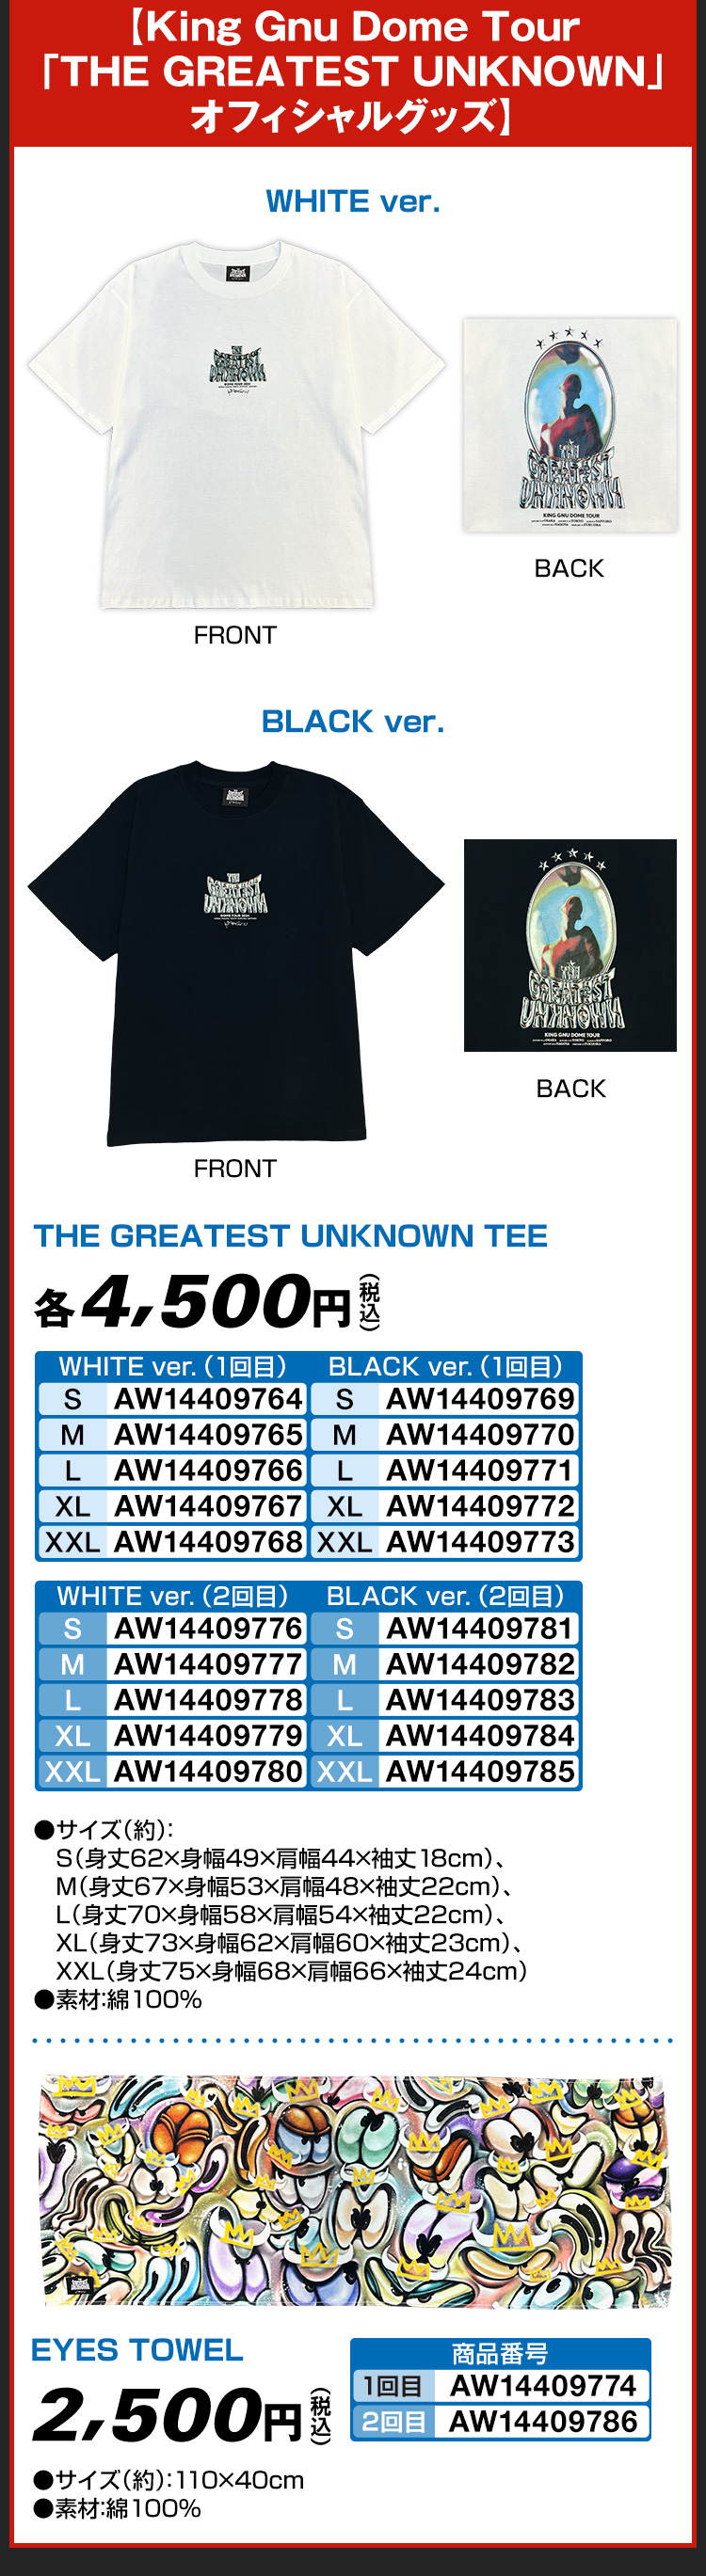 【King Gnu Dome Tour「THE GREATEST UNKNOWN」オフィシャルグッズ】